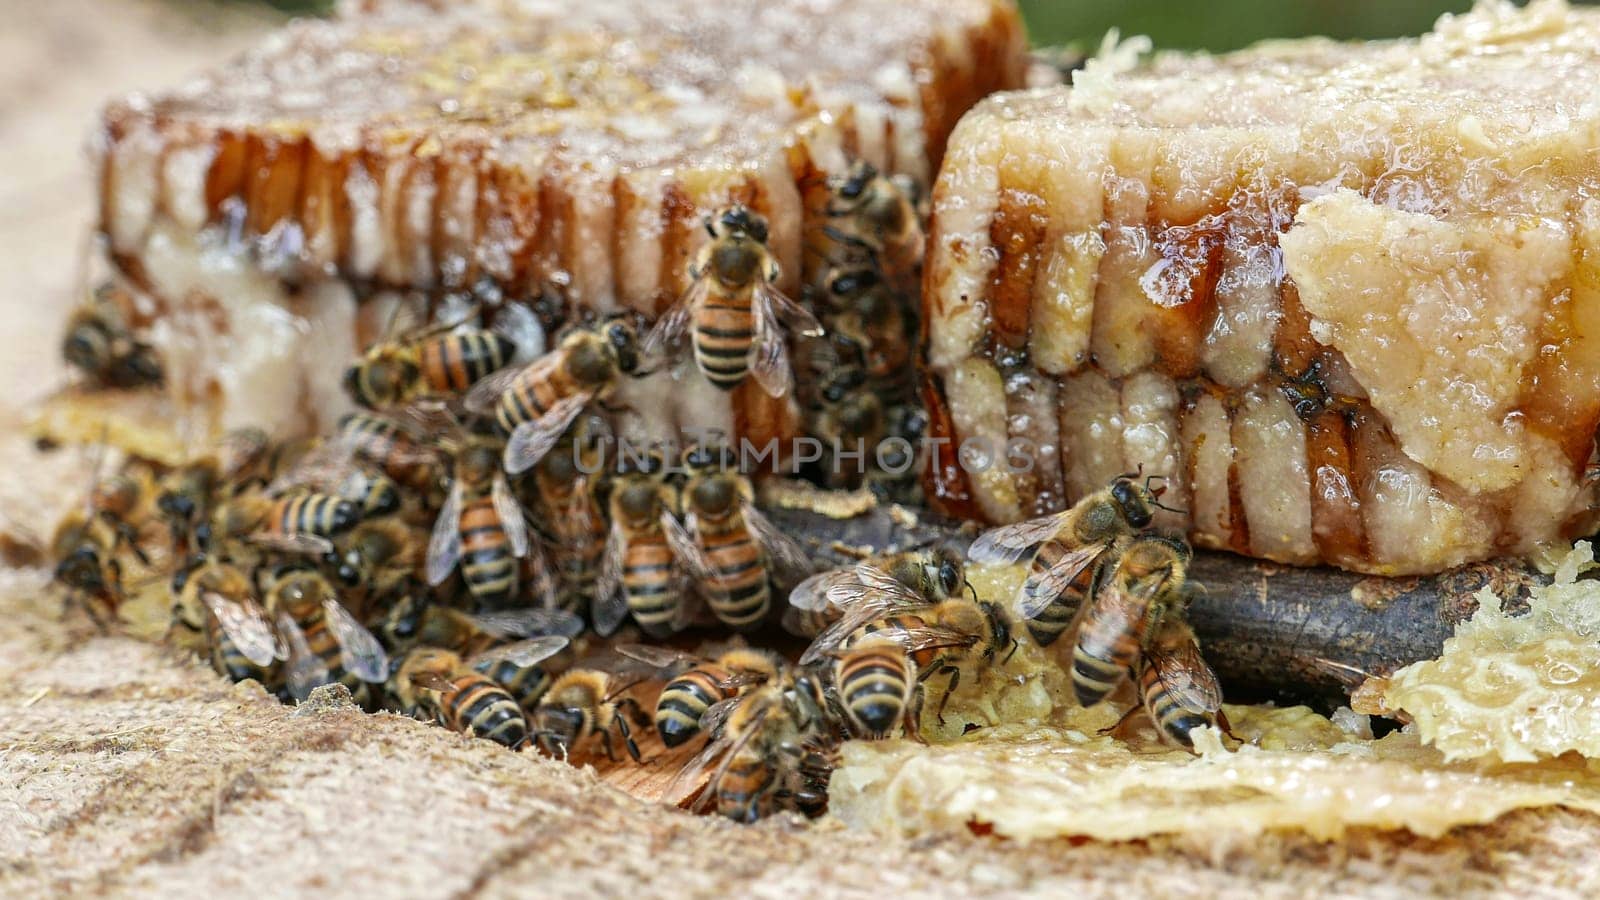 The bees that produce the honey in Italy by contas